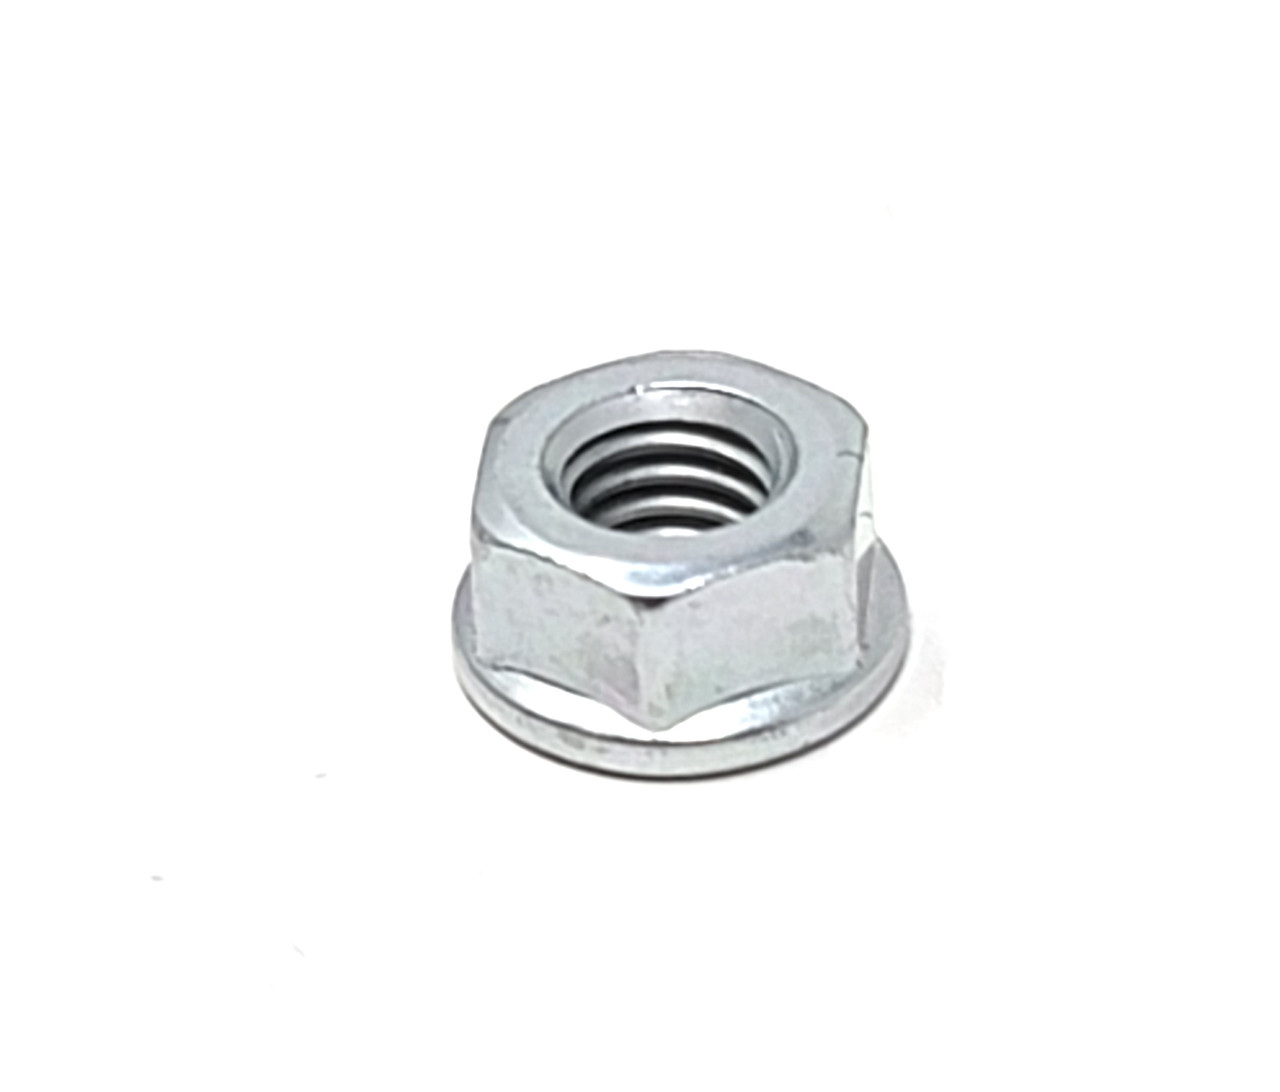 Nut- Toyota M6 X 1.0 Metric Nut For Idle Pulley 90080-17237